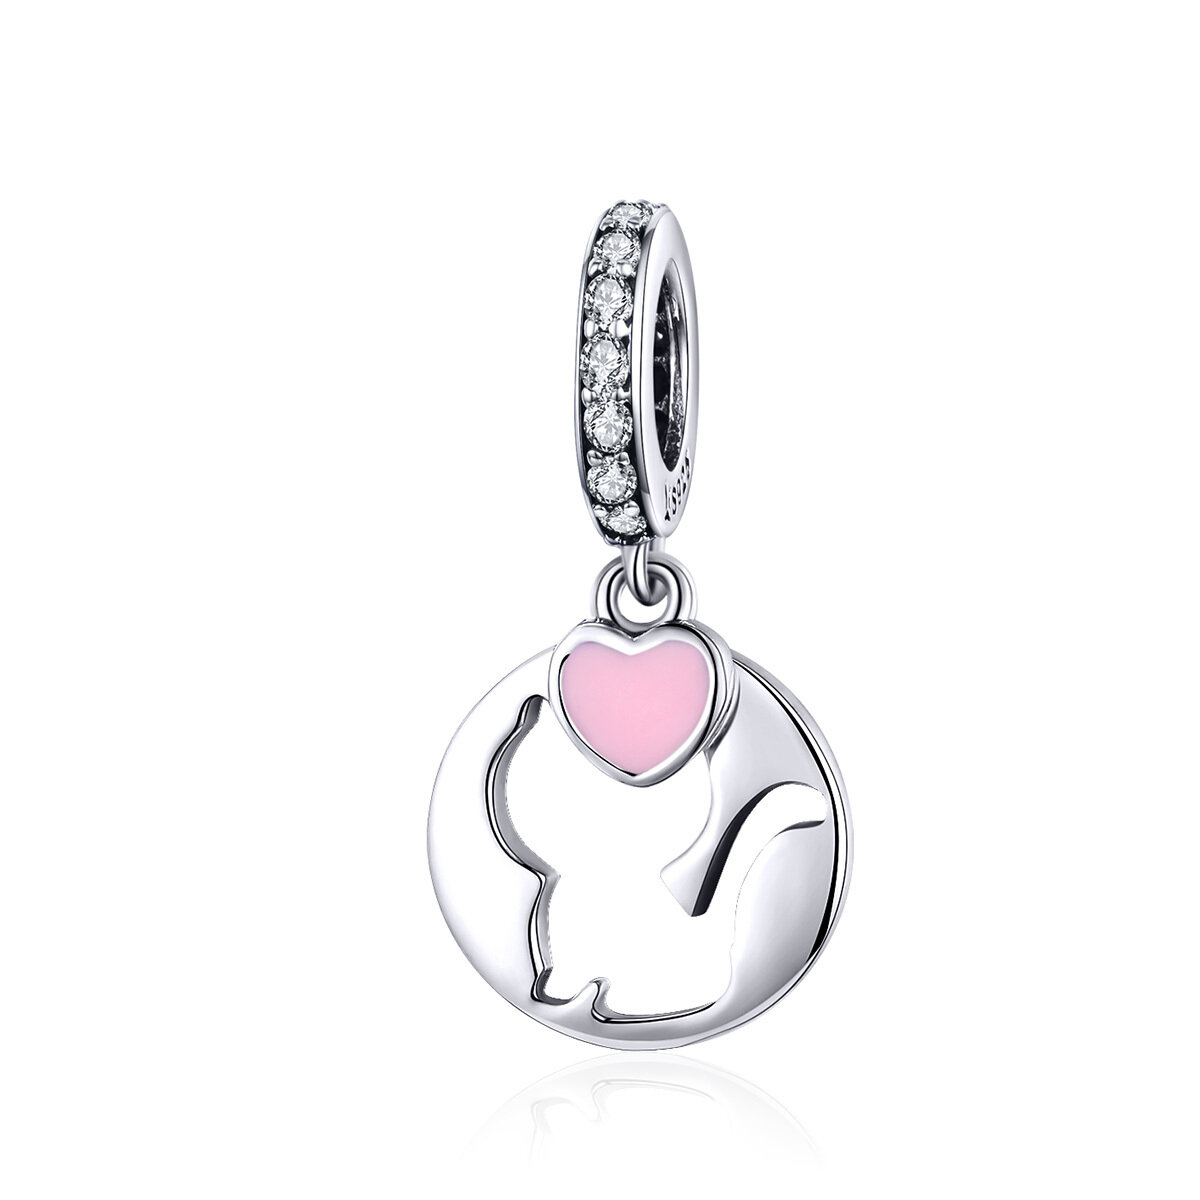 GemKing SCC1140 Happy Kitty S925 Sterling Silver Charm